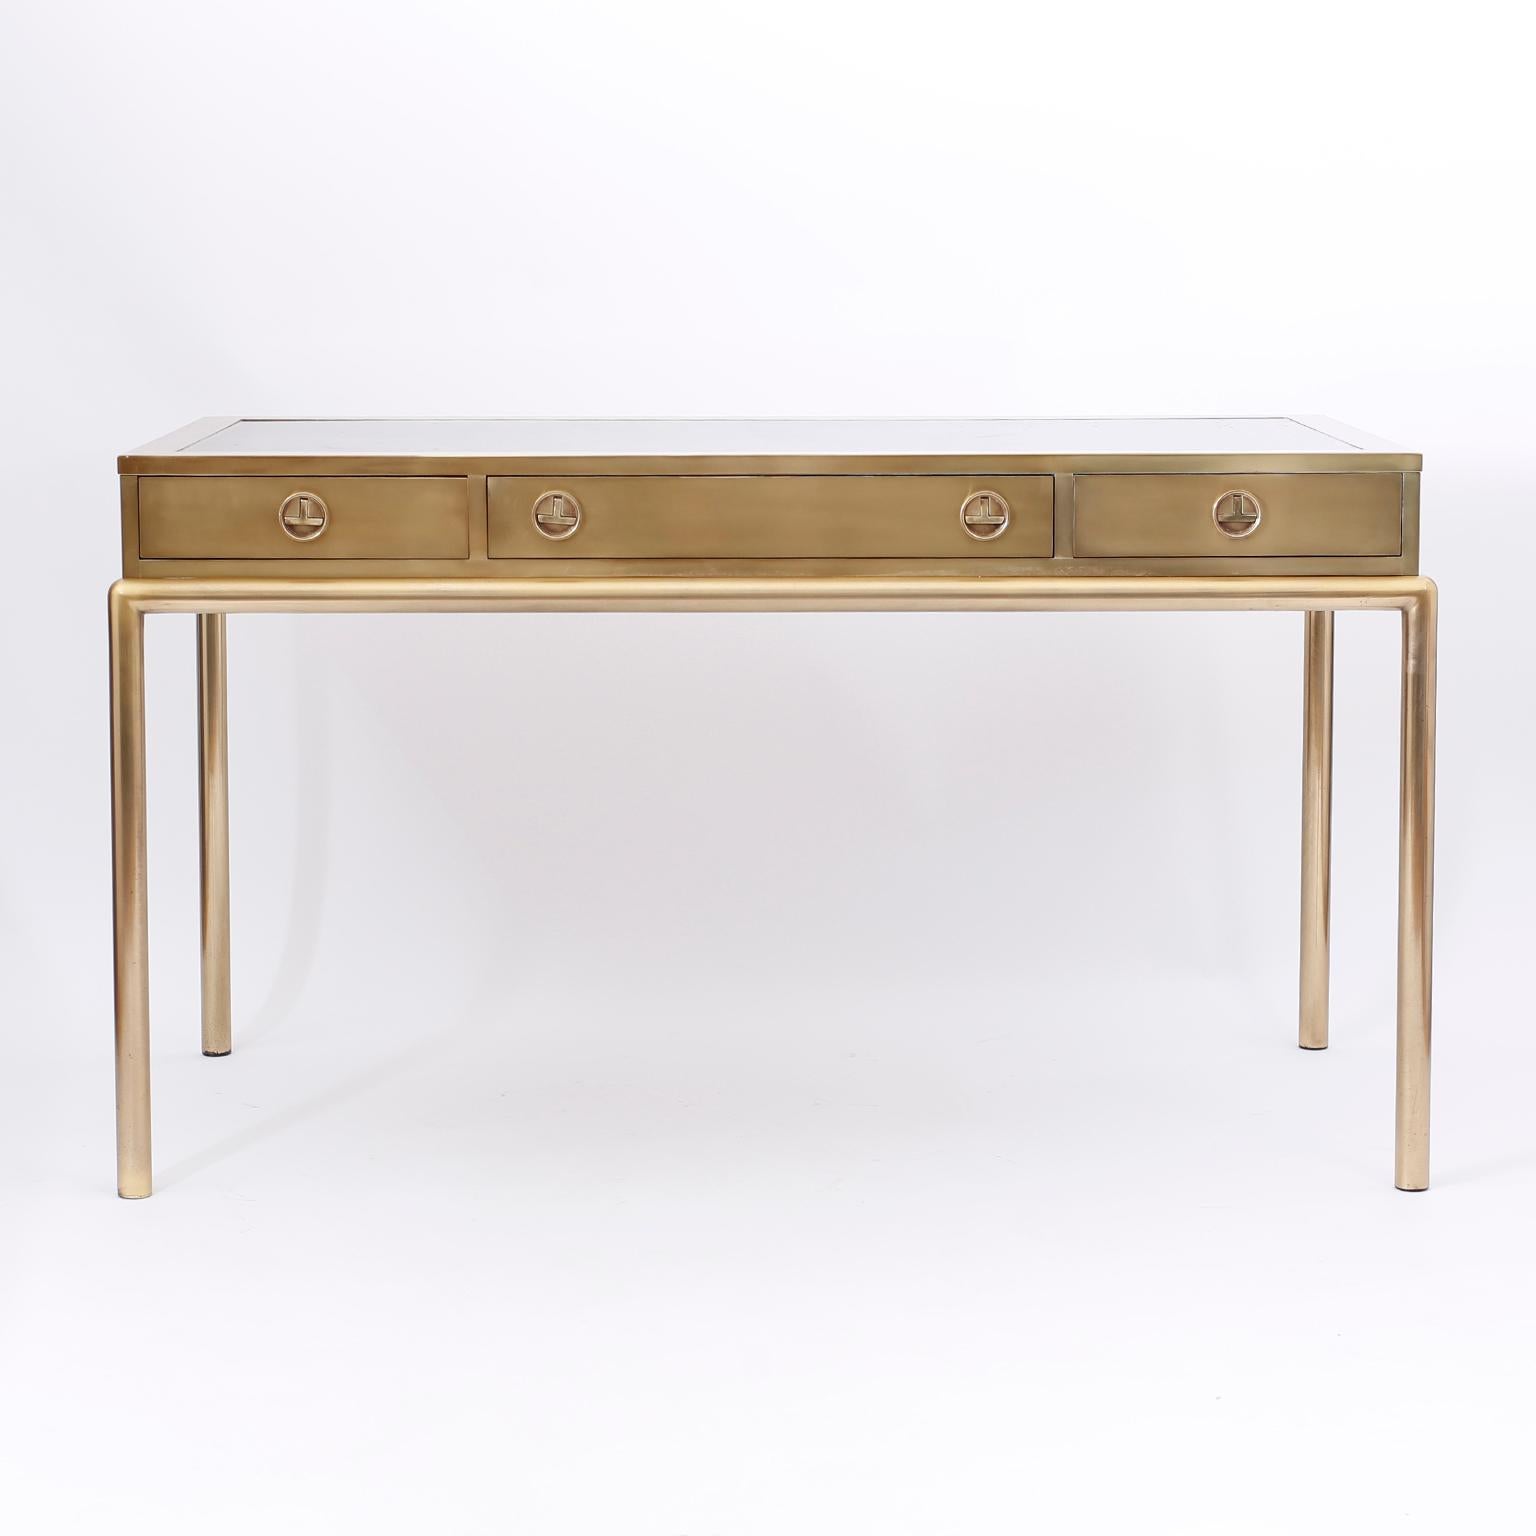 Midcentury three-drawer writing desk with a leather top, stylized Campaign hardware, sleek elegant form, and a chic custom acid washed finish.
  